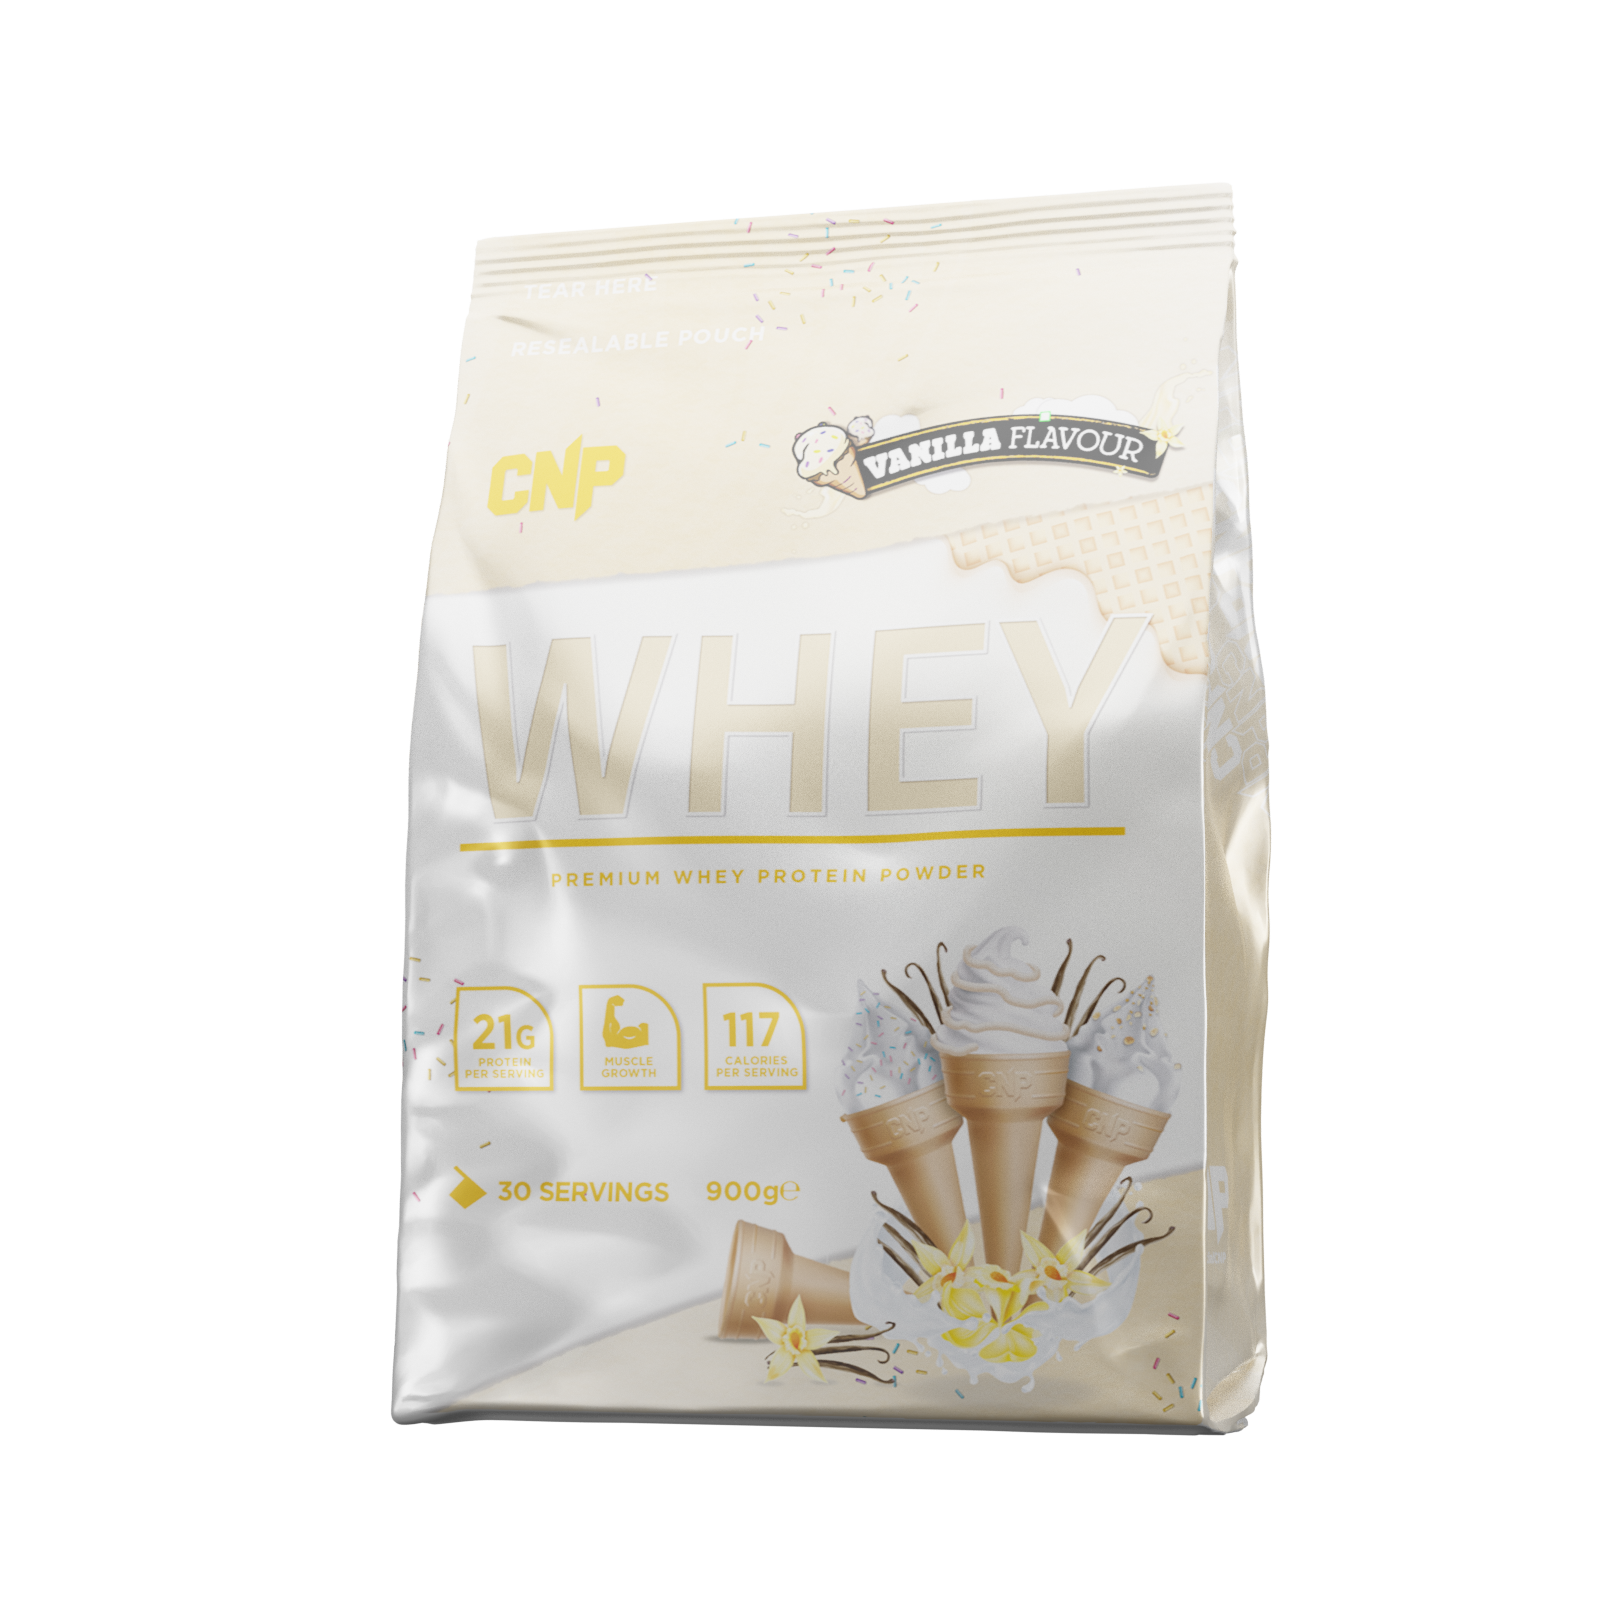 CNP Whey Protein